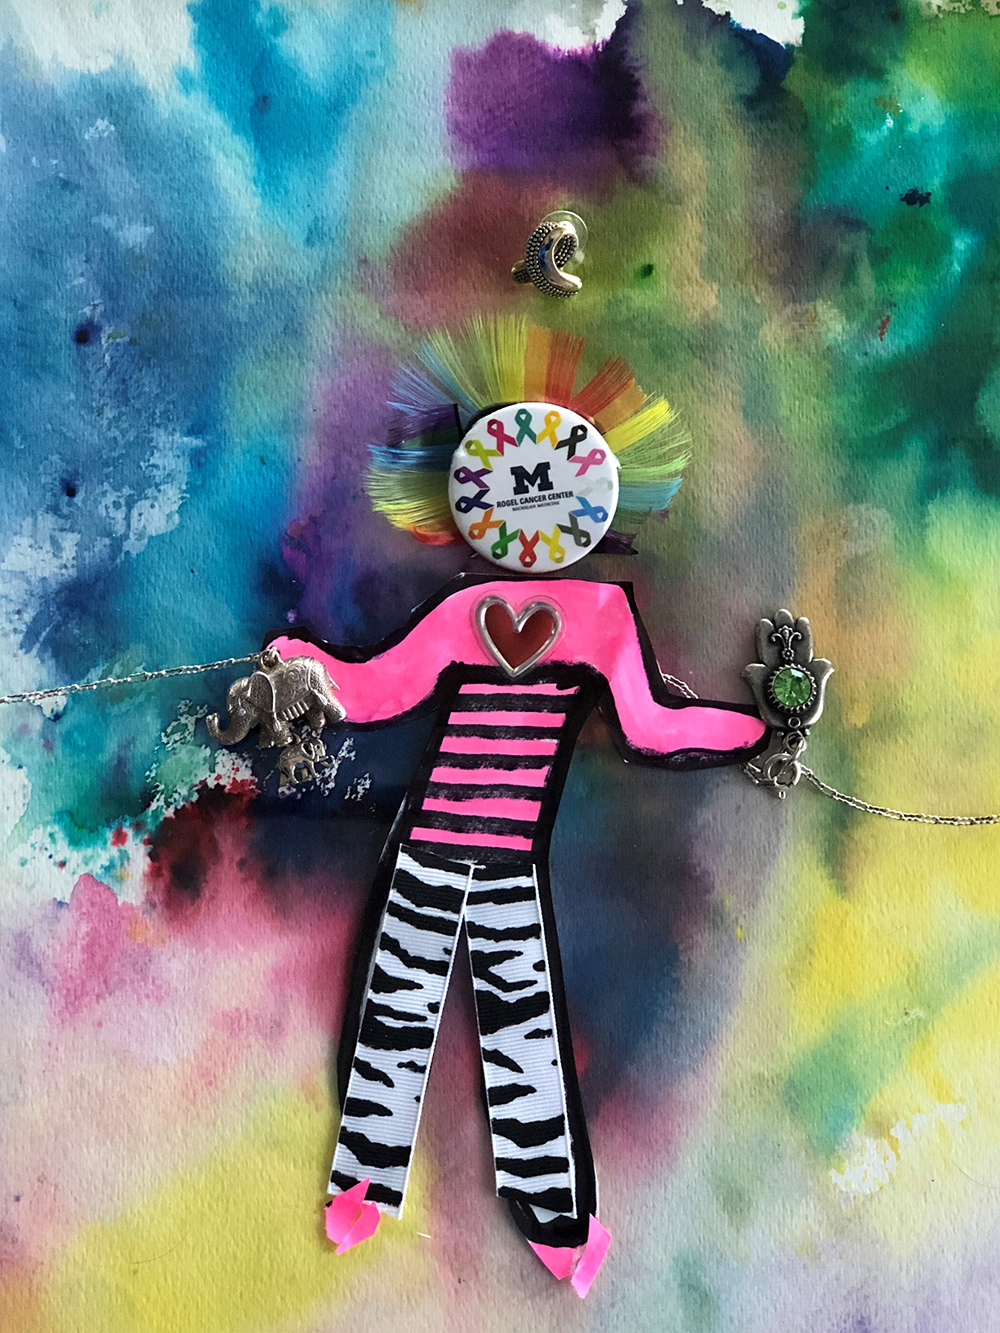 figure of hope with hair made of cancer ribbons, zebra pants and a bright pink shirt